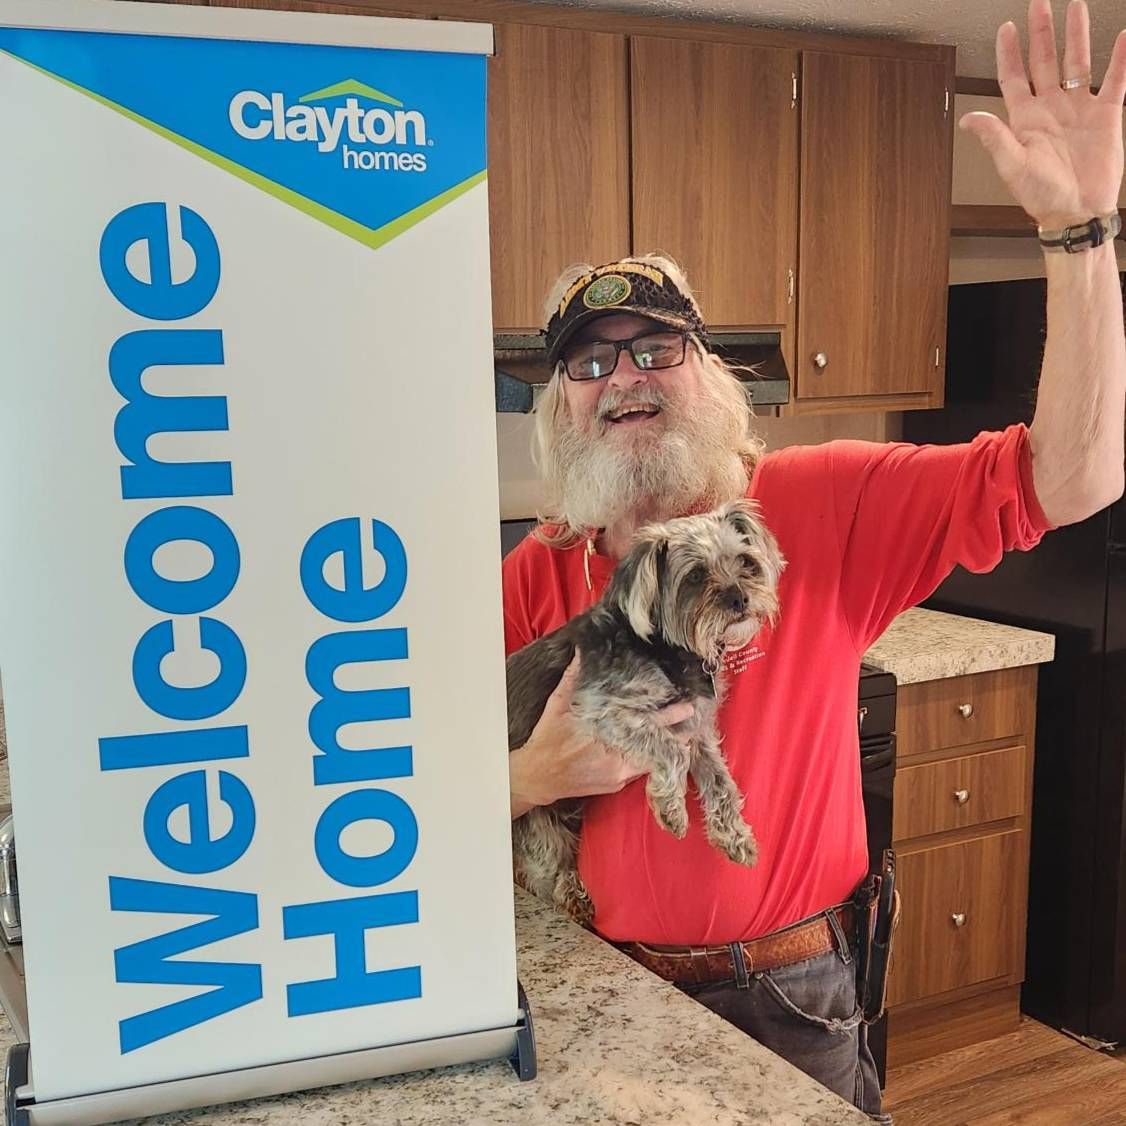 Nelson F. welcome home image